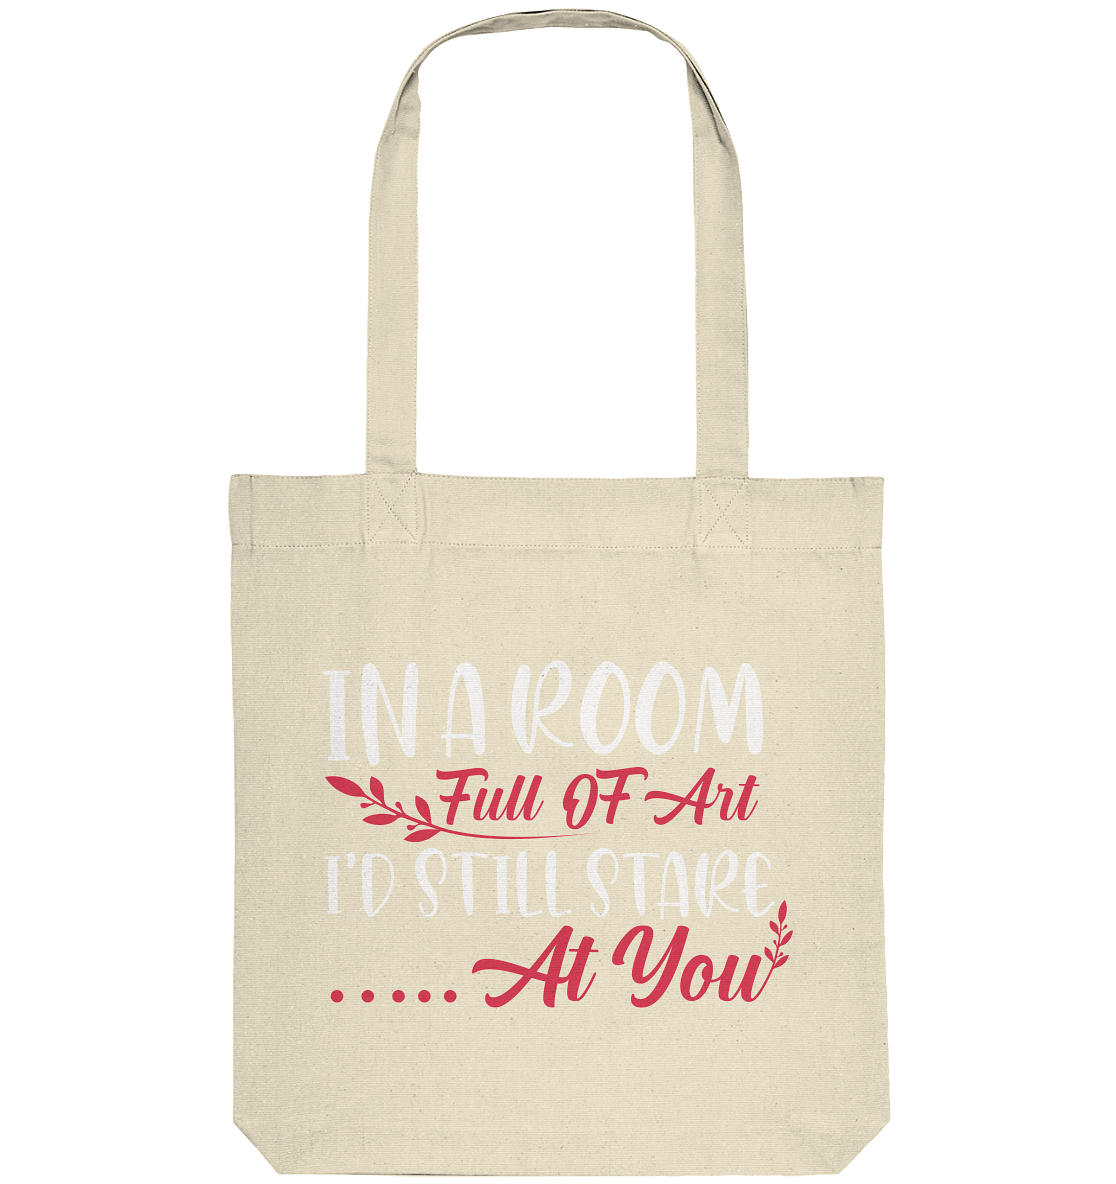 In a room full of art i'd still stare at you - Organic Tote-Bag